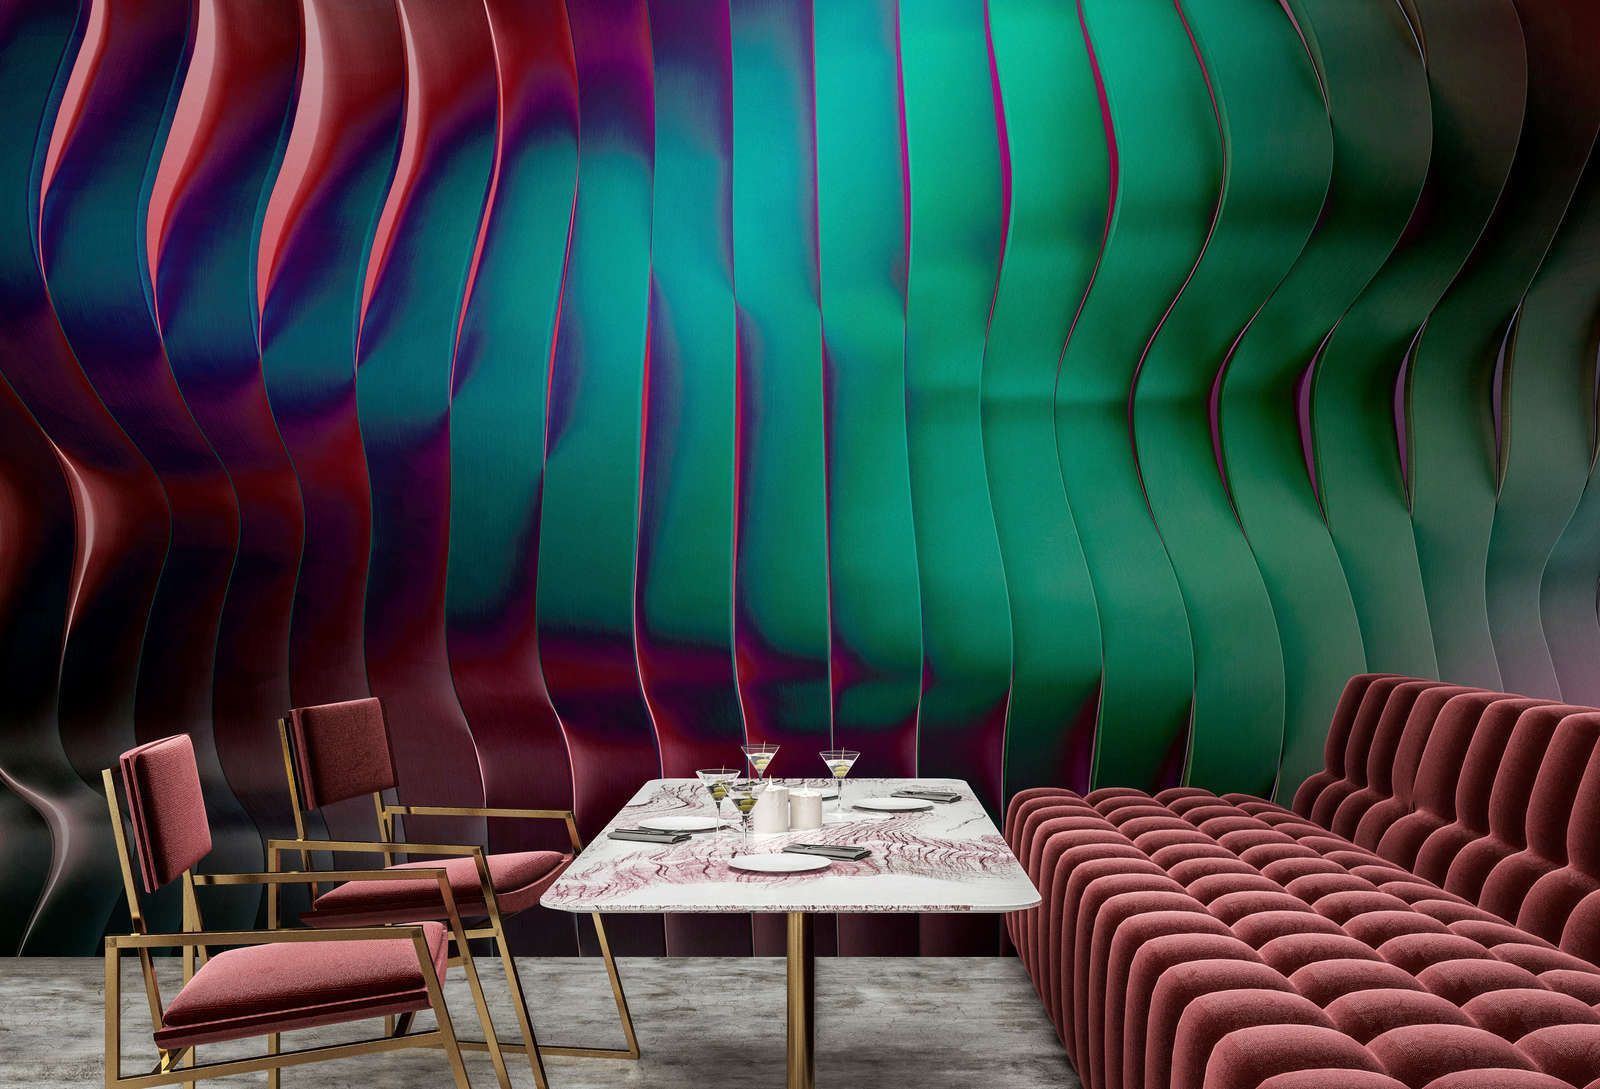             solaris 2 - Modern photo wallpaper with wavy architecture - neon colours | Smooth, slightly shiny premium non-woven fabric
        